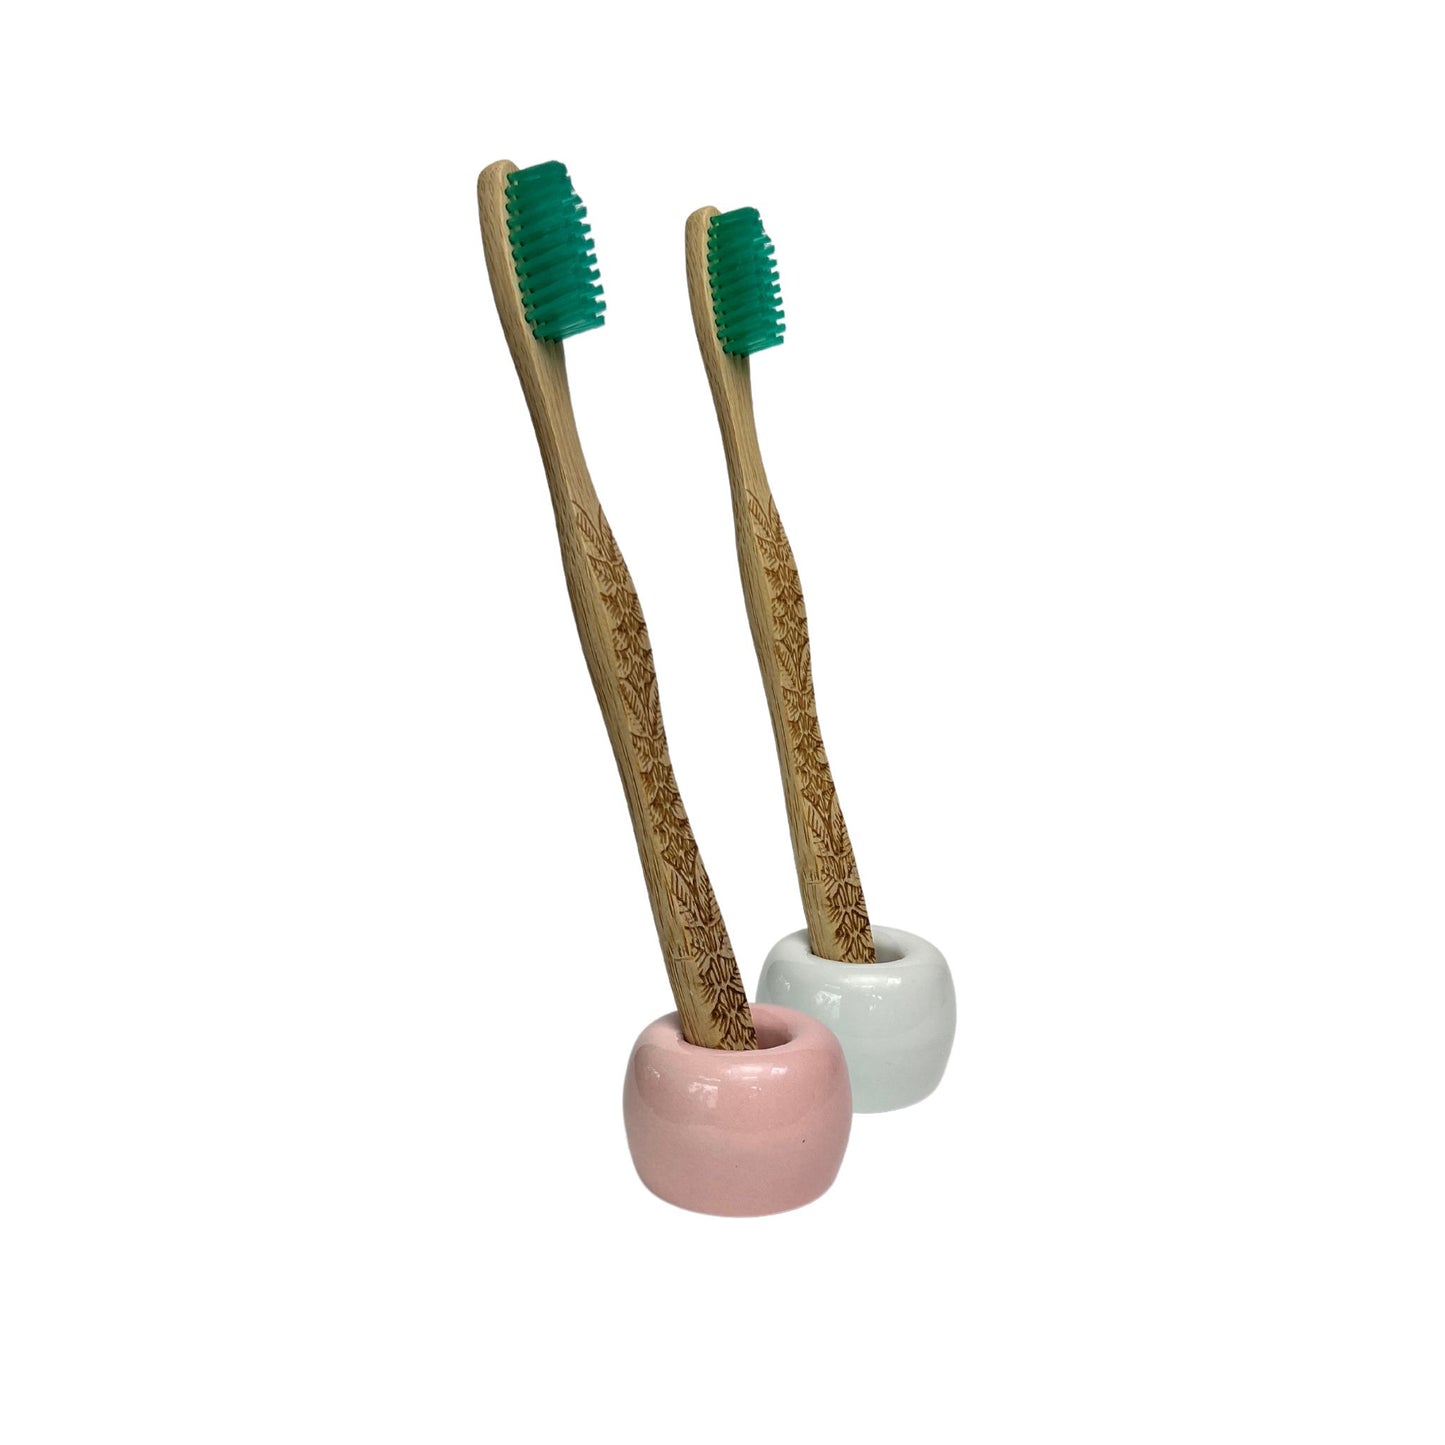 2 small ceramic toothbrush holder in glossy white and a pink finish holding a bamboo toothbrush